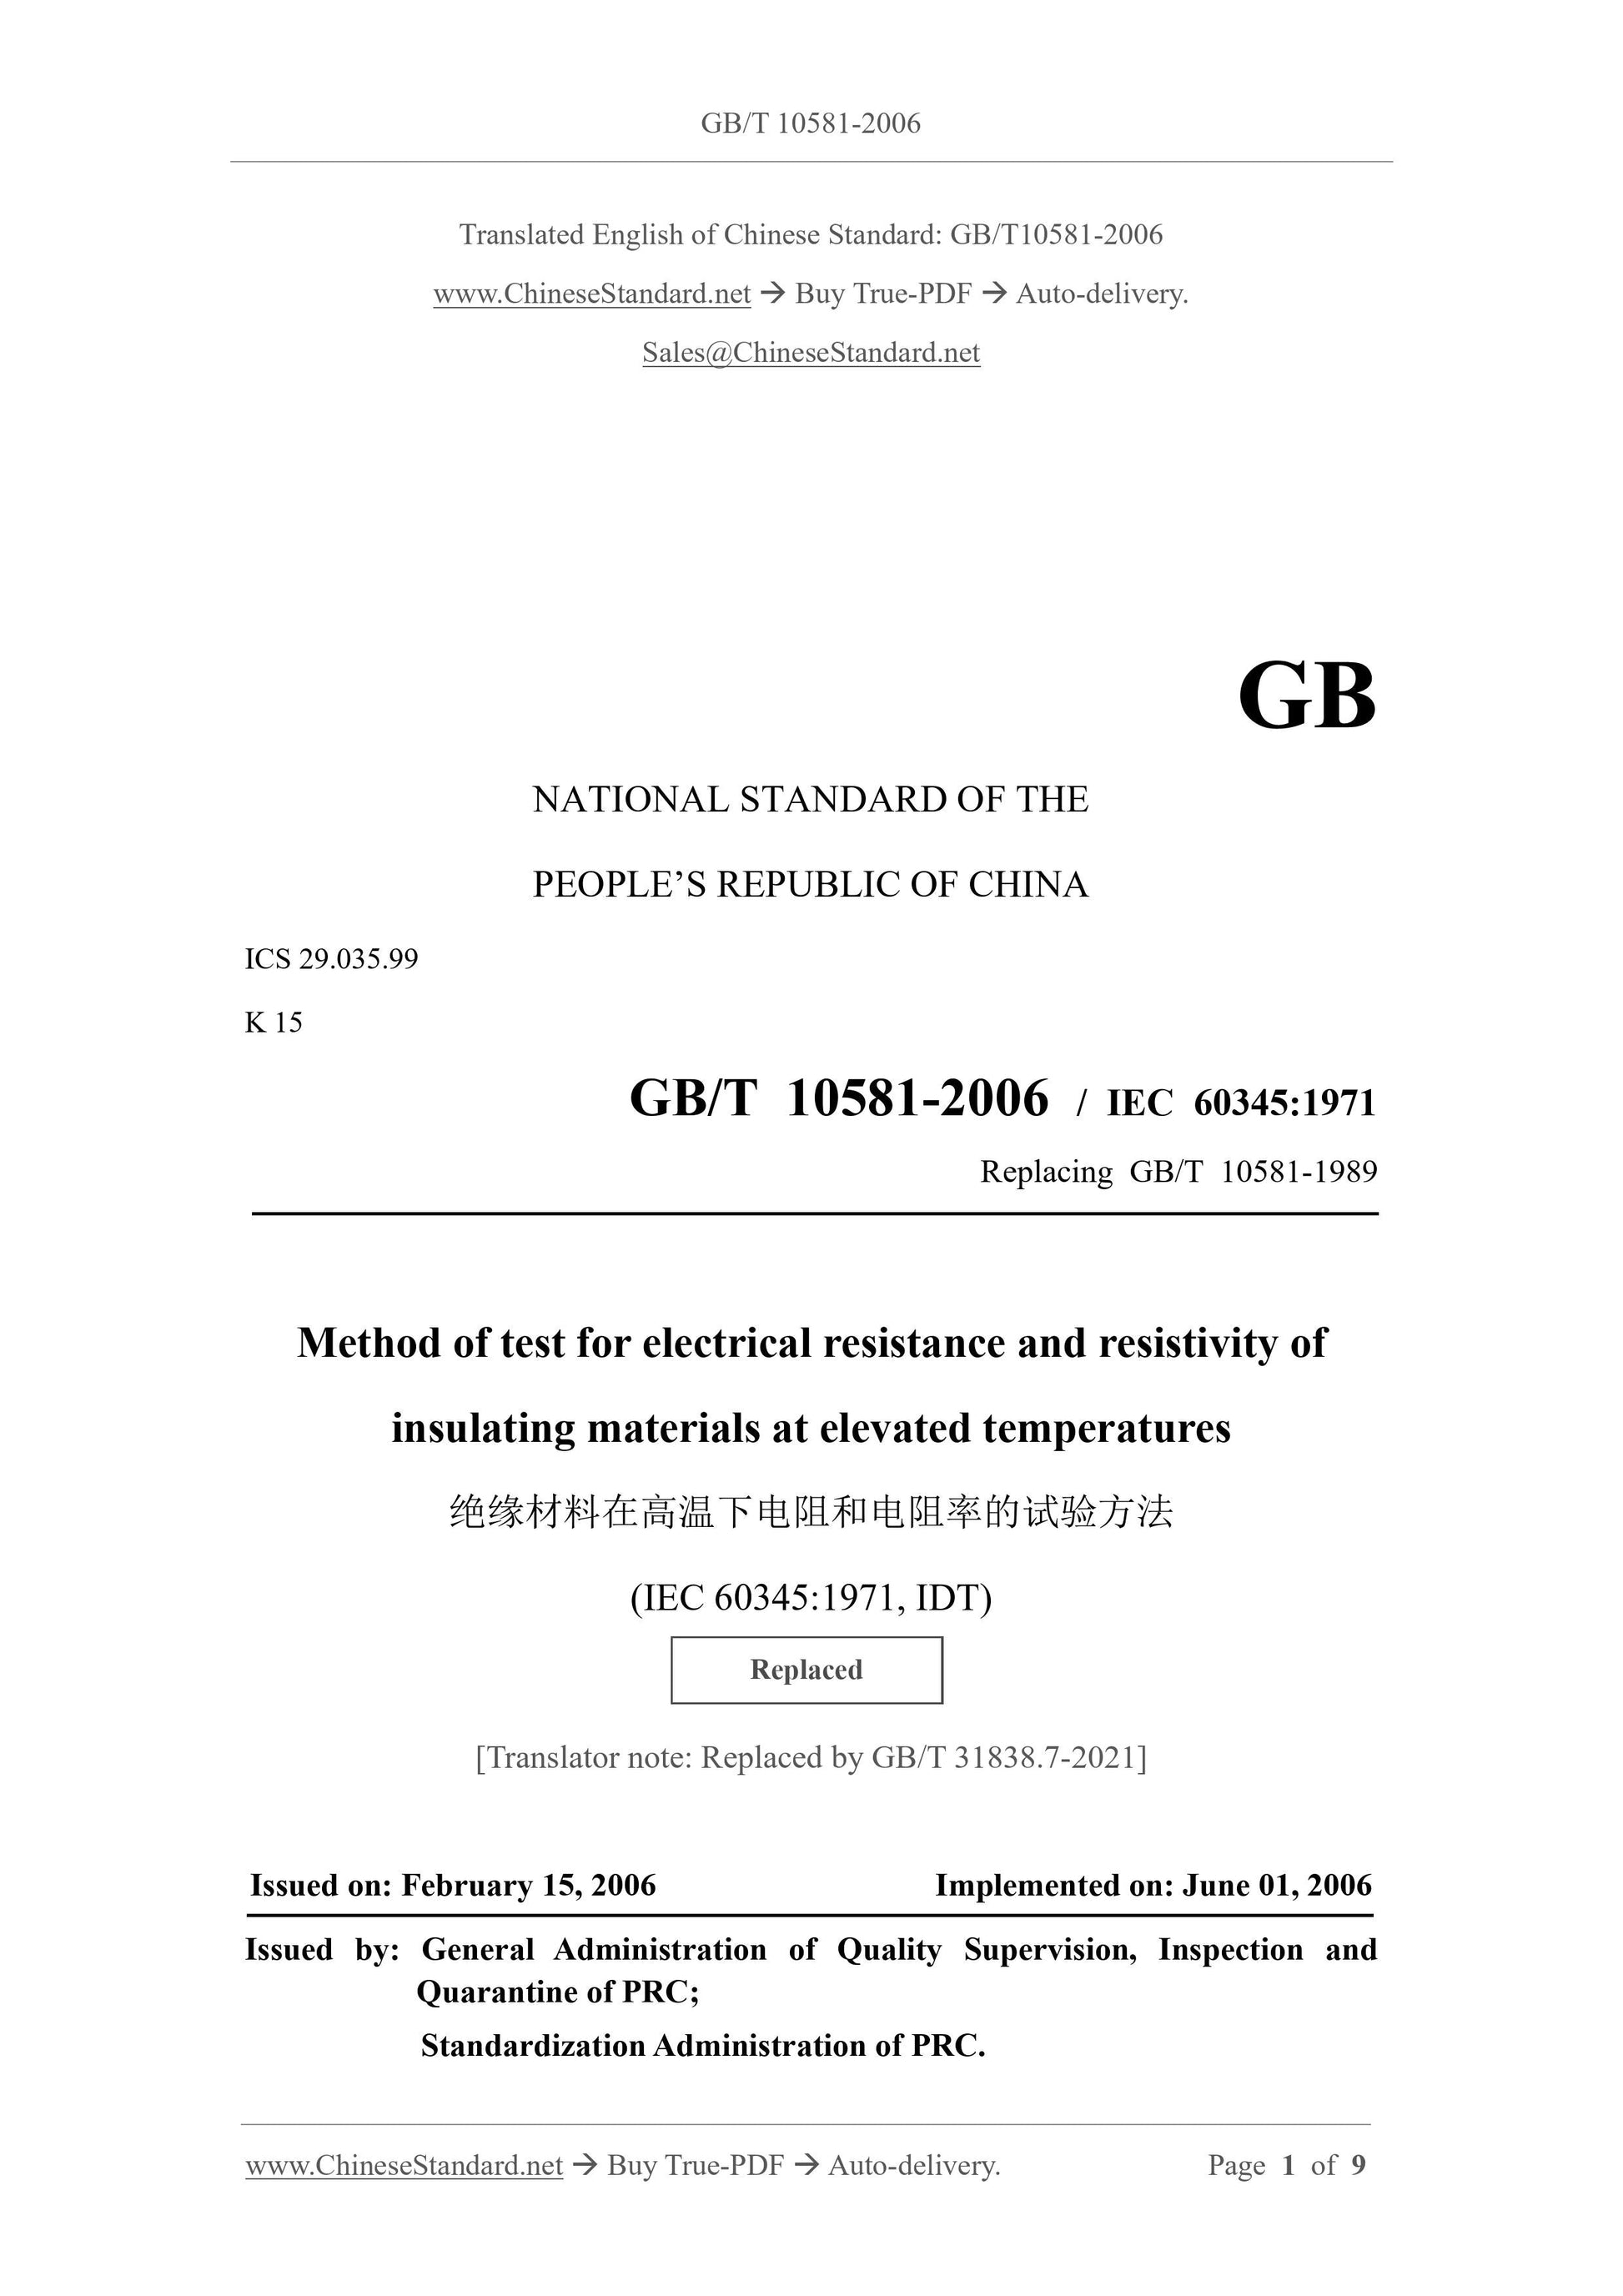 GB/T 10581-2006 Page 1